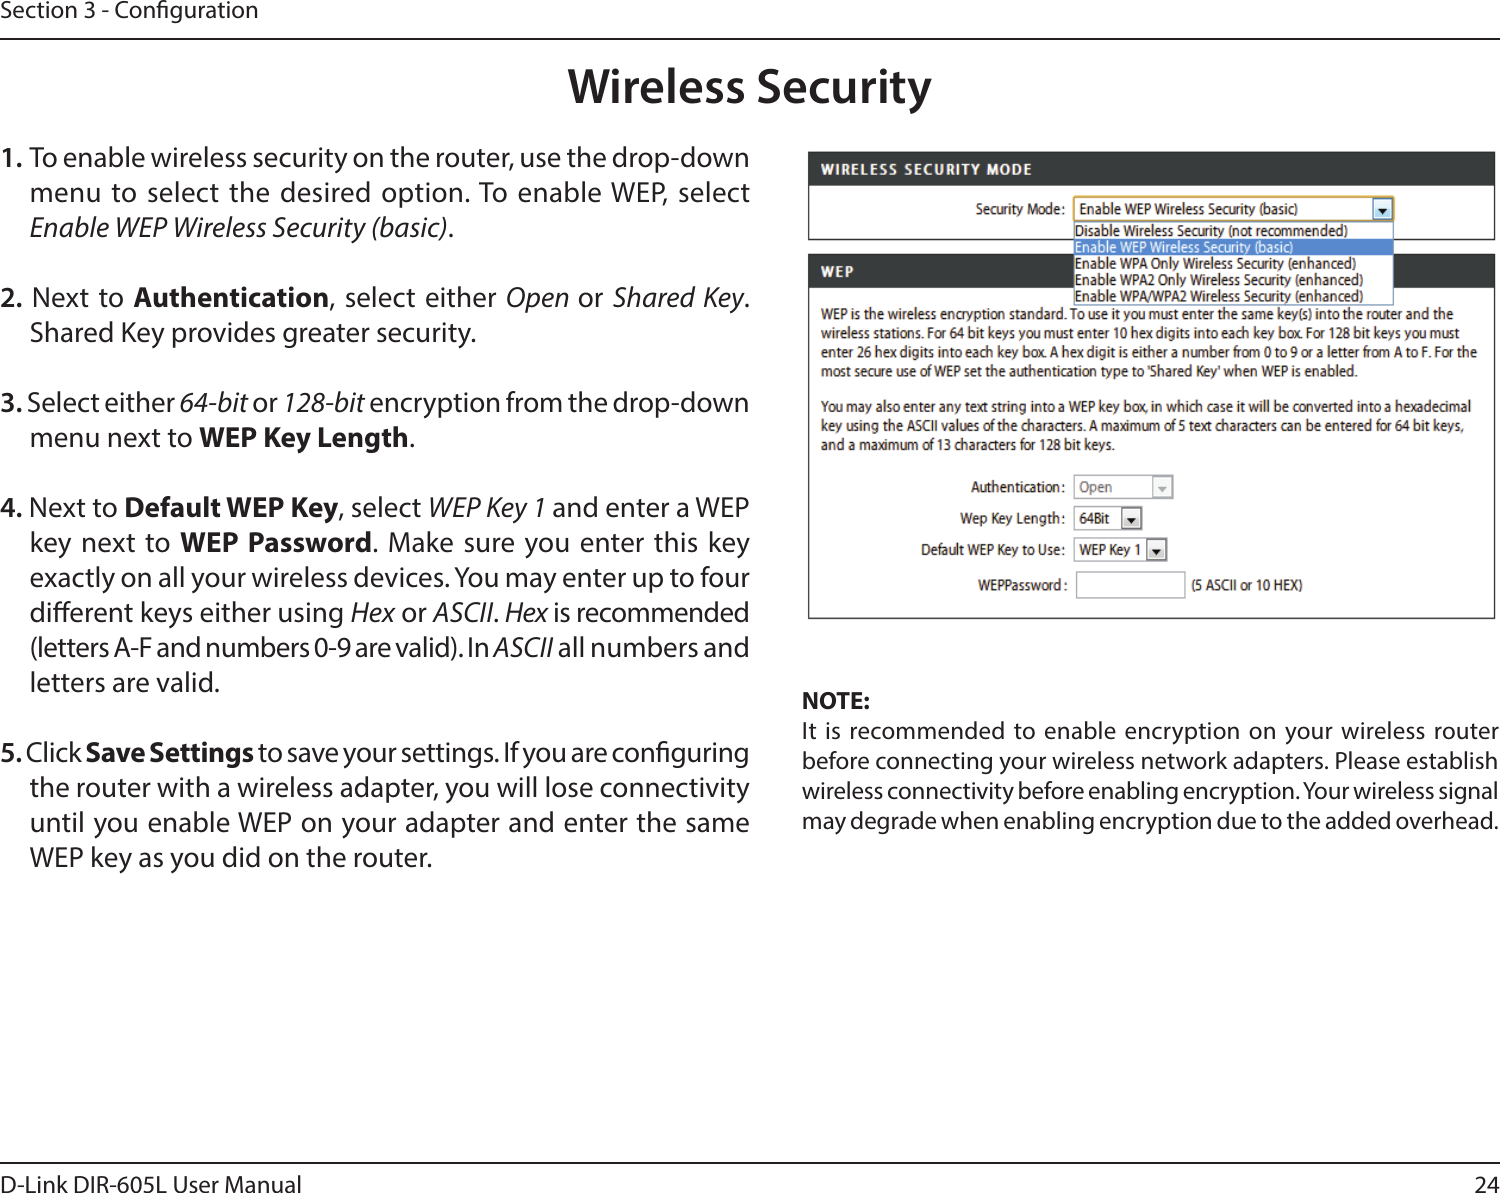 24D-Link DIR-605L User ManualSection 3 - Conguration1. To enable wireless security on the router, use the drop-down menu to select the desired option. To enable WEP, select Enable WEP Wireless Security (basic).2. Next to Authentication, select either Open or Shared Key. Shared Key provides greater security.3. Select either 64-bit or 128-bit encryption from the drop-down menu next to WEP Key Length. 4. Next to Default WEP Key, select WEP Key 1 and enter a WEP key next to WEP Password. Make sure you enter this key exactly on all your wireless devices. You may enter up to four dierent keys either using Hex or ASCII. Hex is recommended (letters A-F and numbers 0-9 are valid). In ASCII all numbers and letters are valid.5. Click Save Settings to save your settings. If you are conguring the router with a wireless adapter, you will lose connectivity until you enable WEP on your adapter and enter the same WEP key as you did on the router.NOTE:It is recommended to enable encryption on your wireless router before connecting your wireless network adapters. Please establish wireless connectivity before enabling encryption. Your wireless signal may degrade when enabling encryption due to the added overhead.Wireless Security